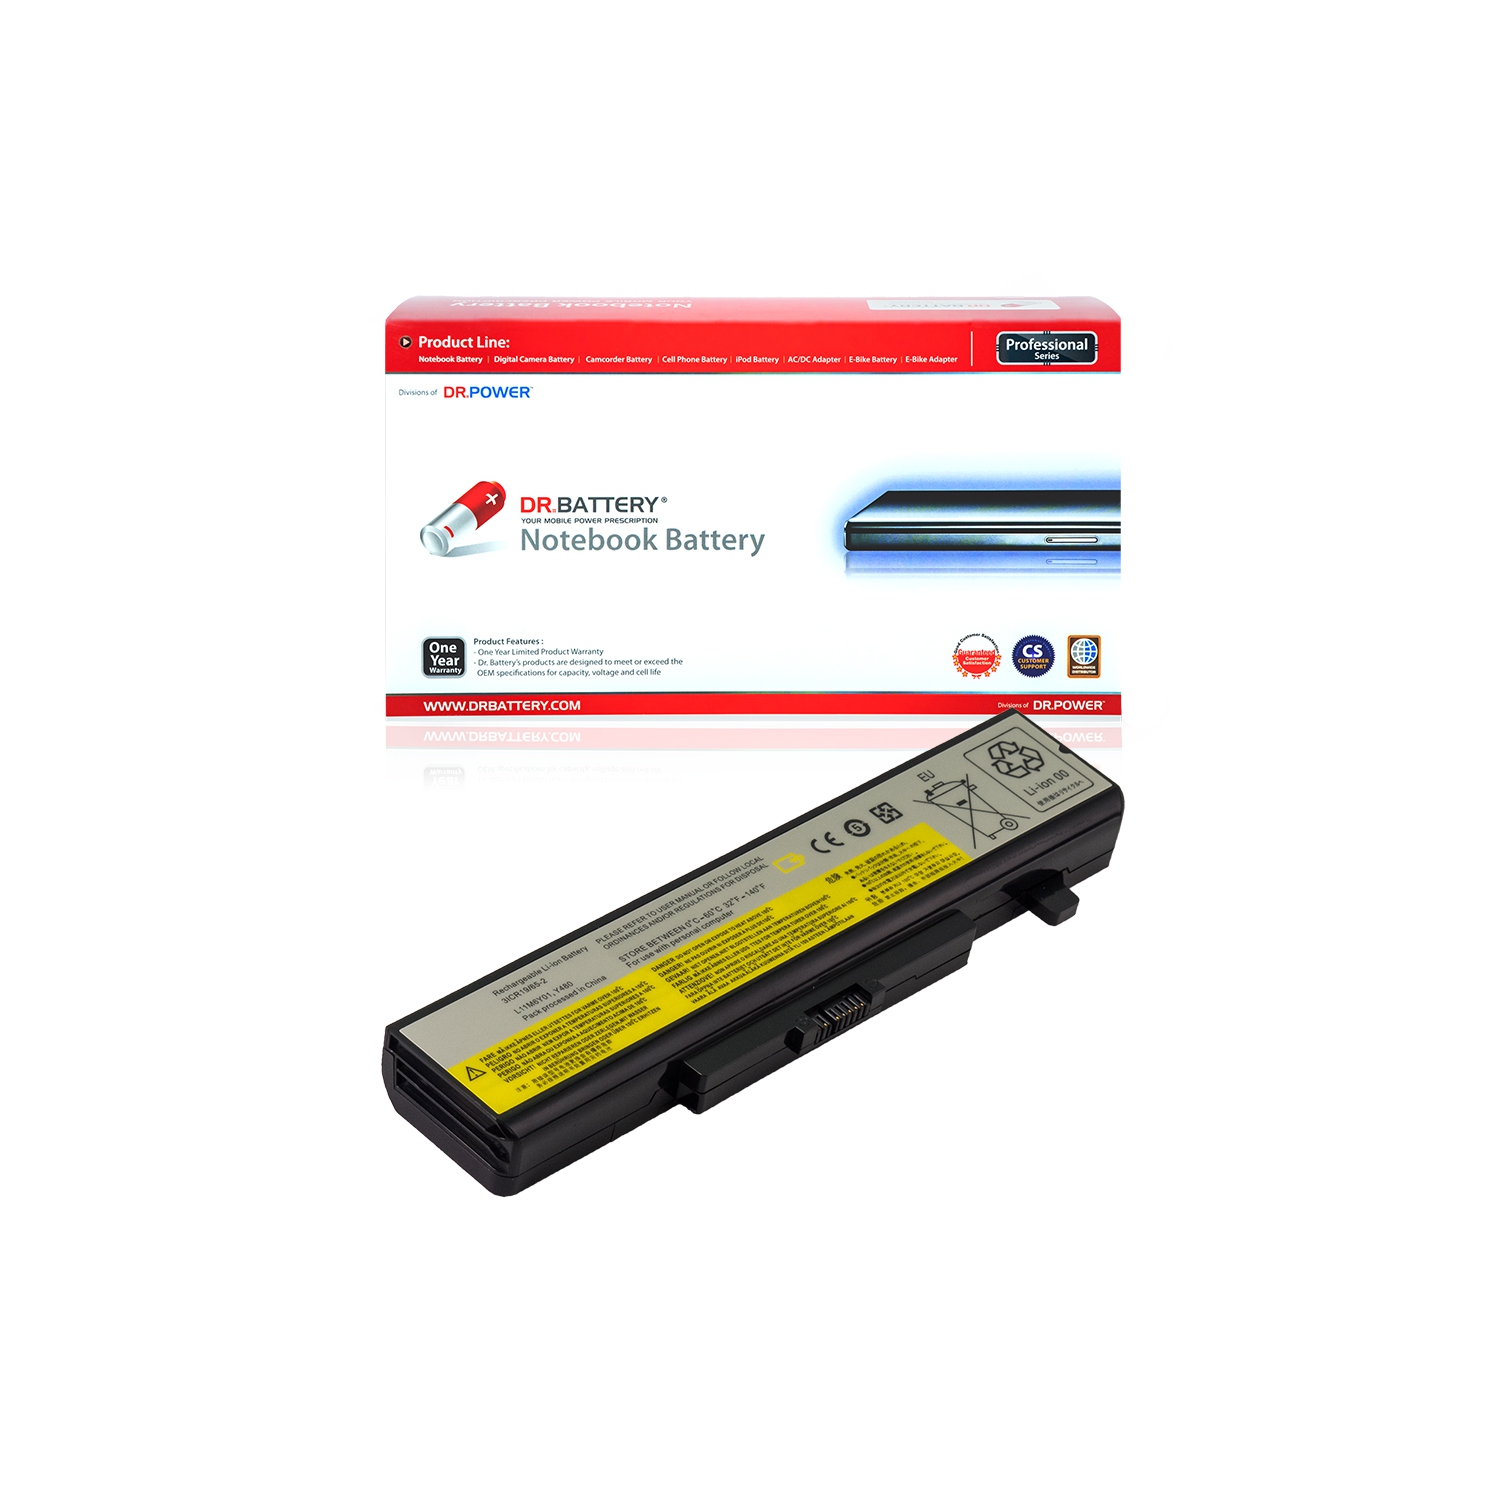 DR. BATTERY - Replacement for Lenovo Essential B590 / G480 / G485 / G580 / G585 / L11N6Y01 / L11P6R01 / L11S6F01 / L11S6Y01